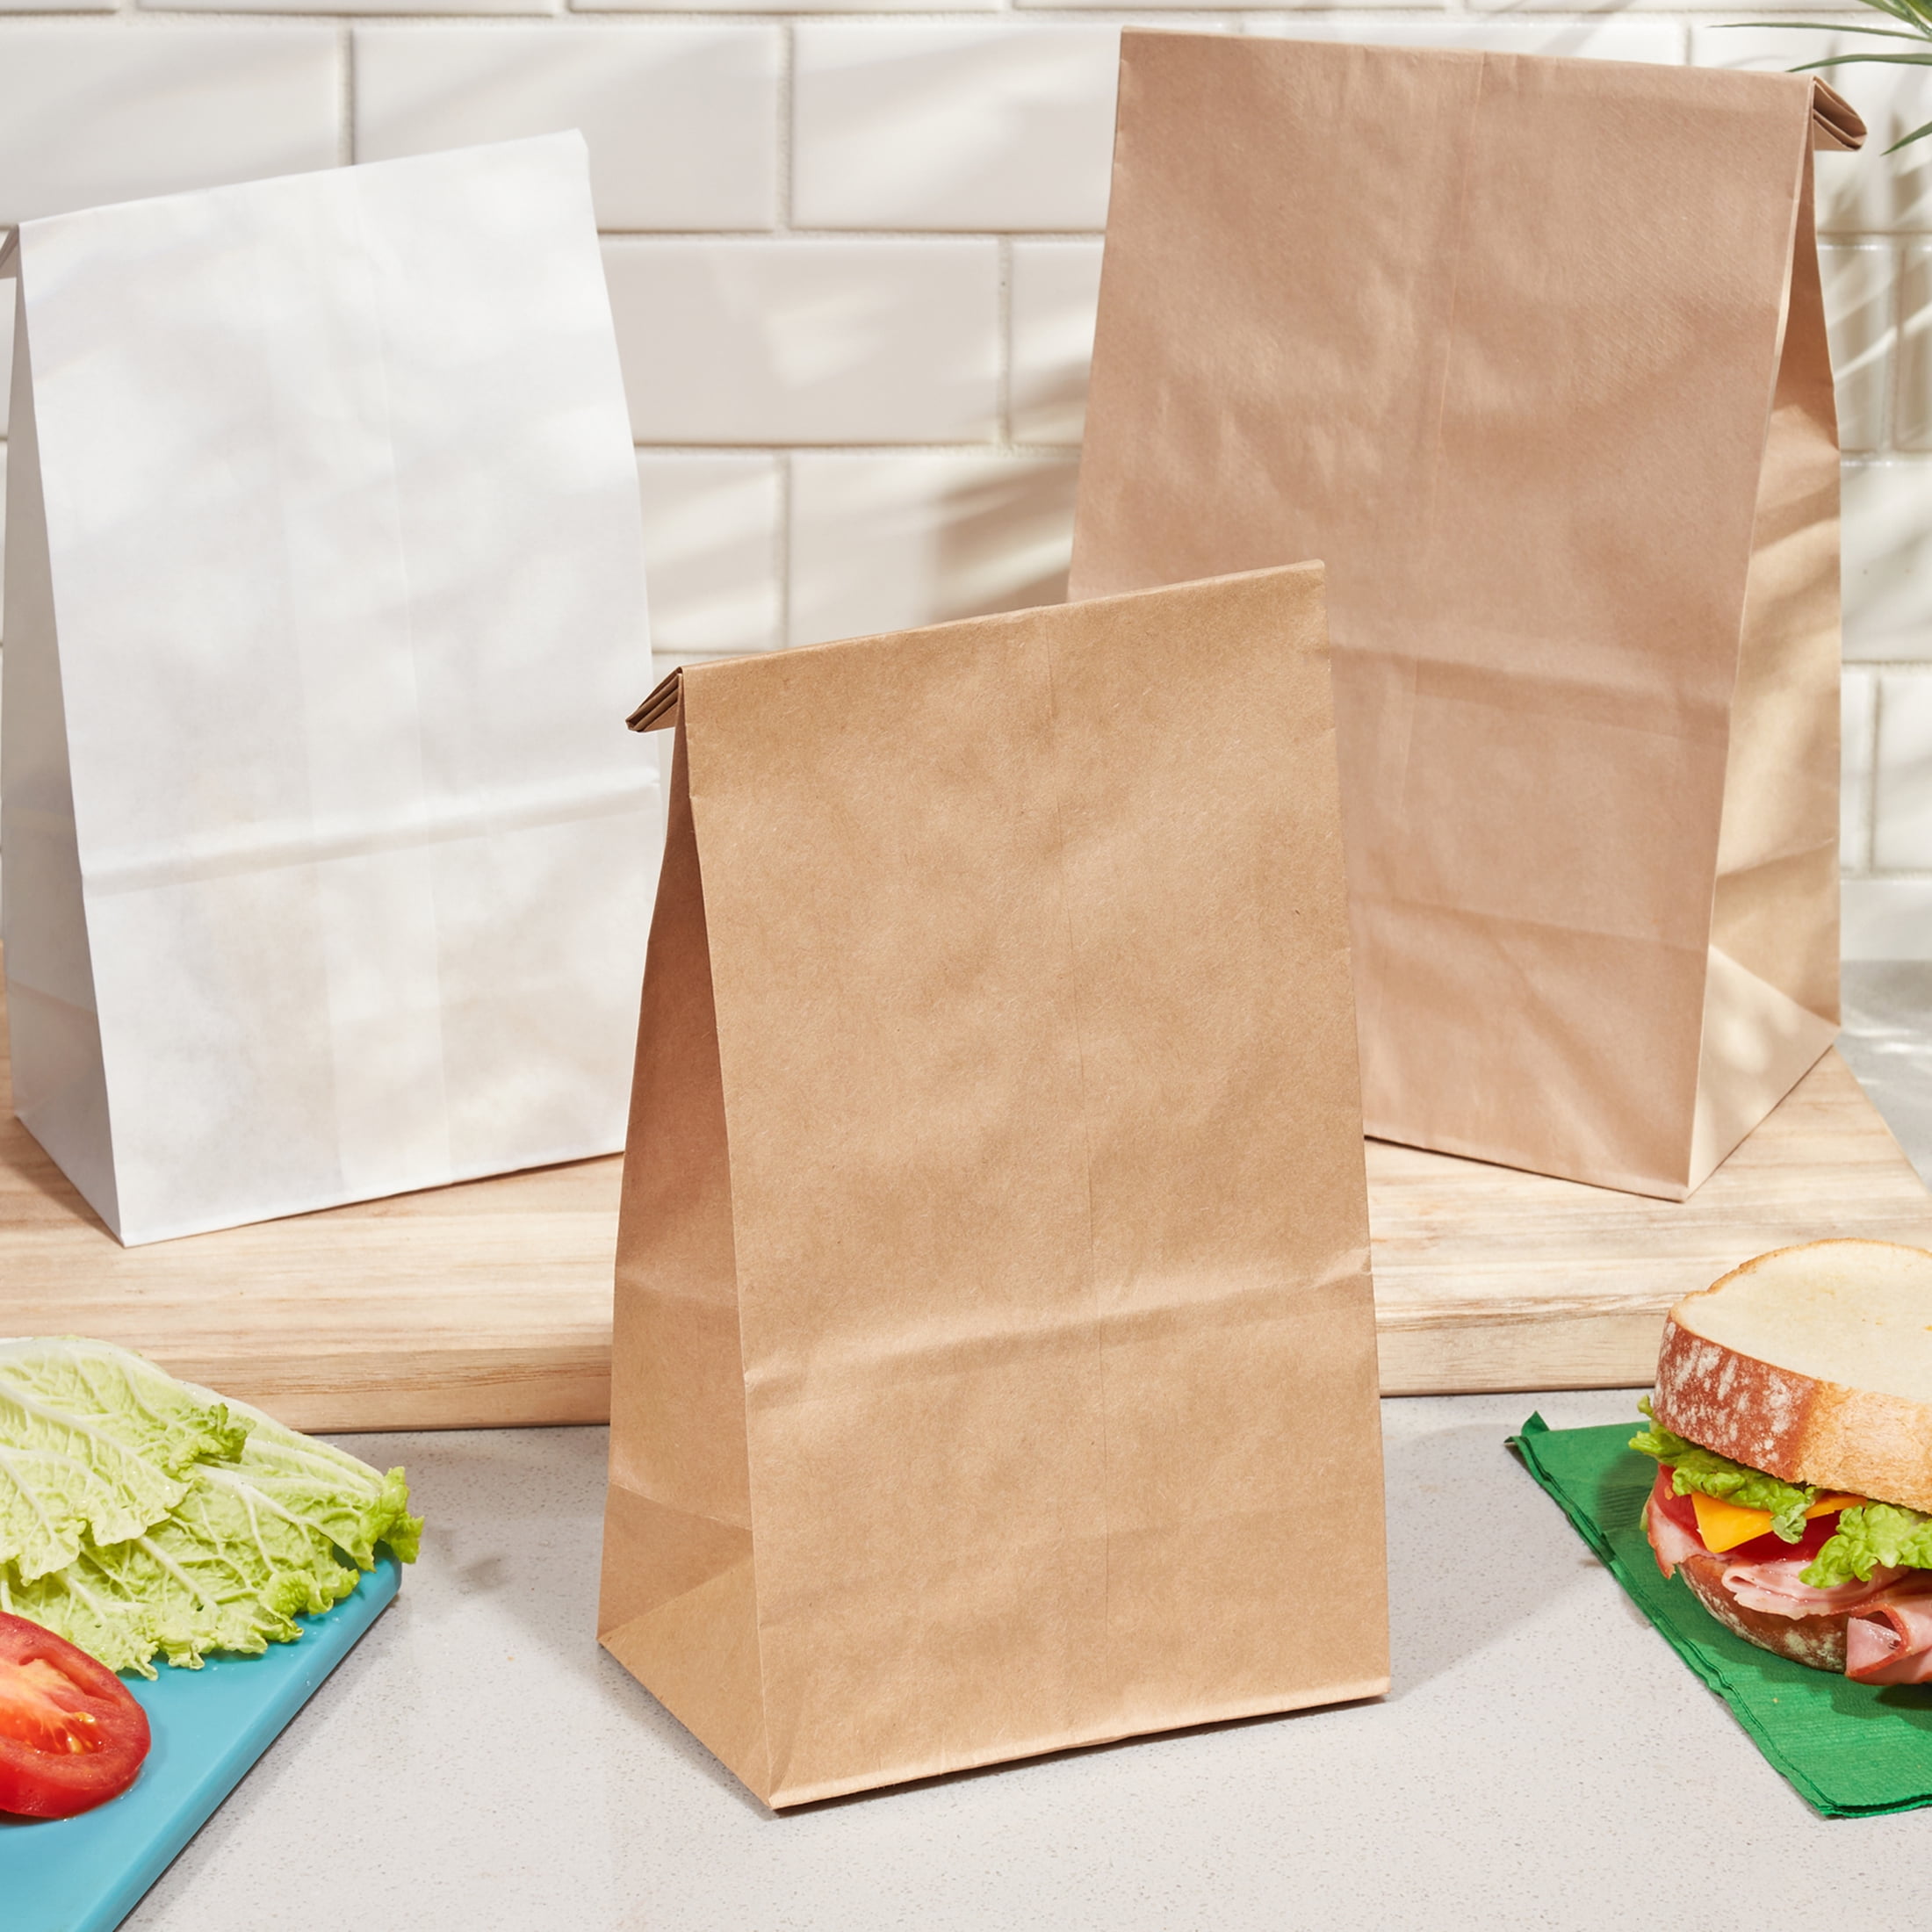  Stock Your Home 12 Lb White Paper Bags (100 Count) - Eco  Friendly White Lunch Bags - White Paper Bags for Packing Lunch & Snacks -  Blank White Lunch Bags Paper